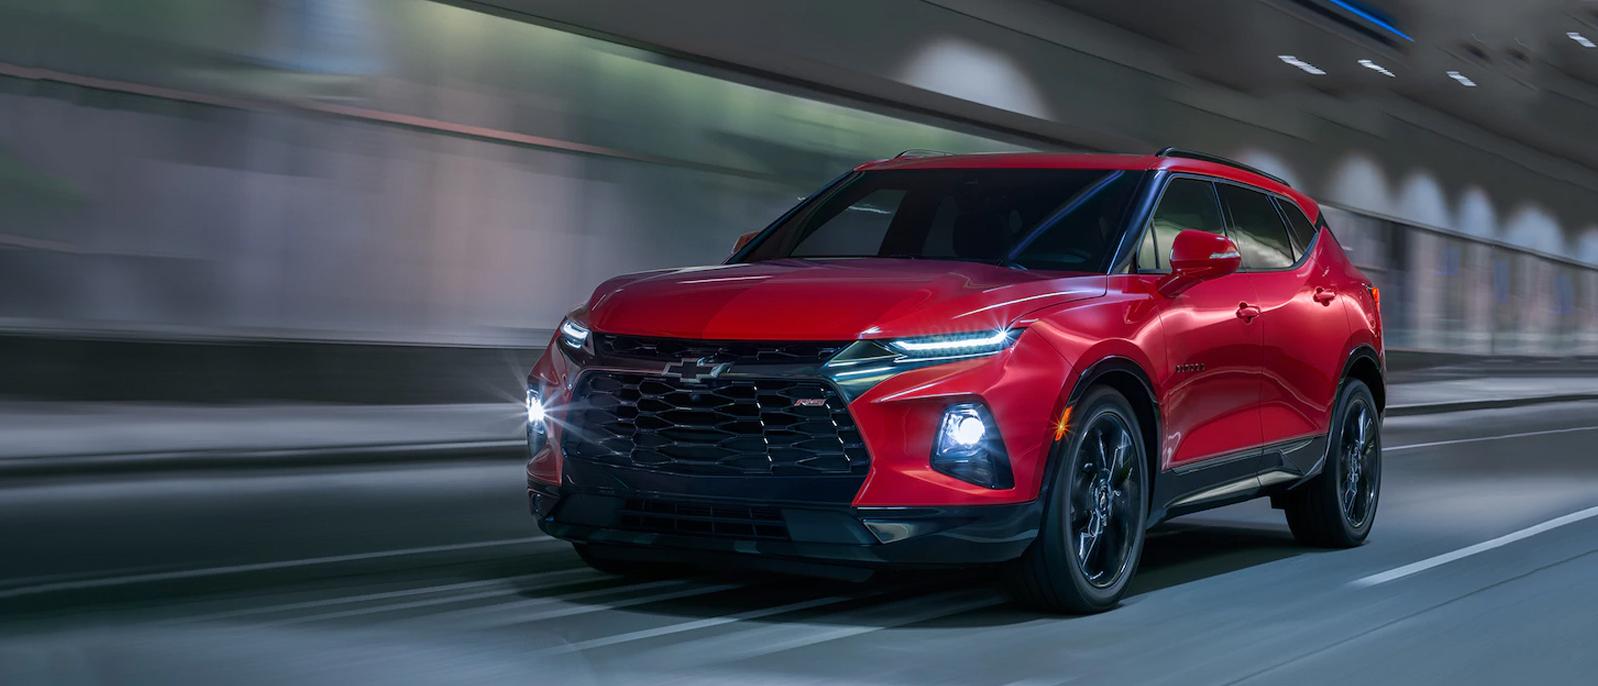 2019 Chevy Blazer for sale in Pittsburgh, PA at North Star Chevrolet - Moon Township